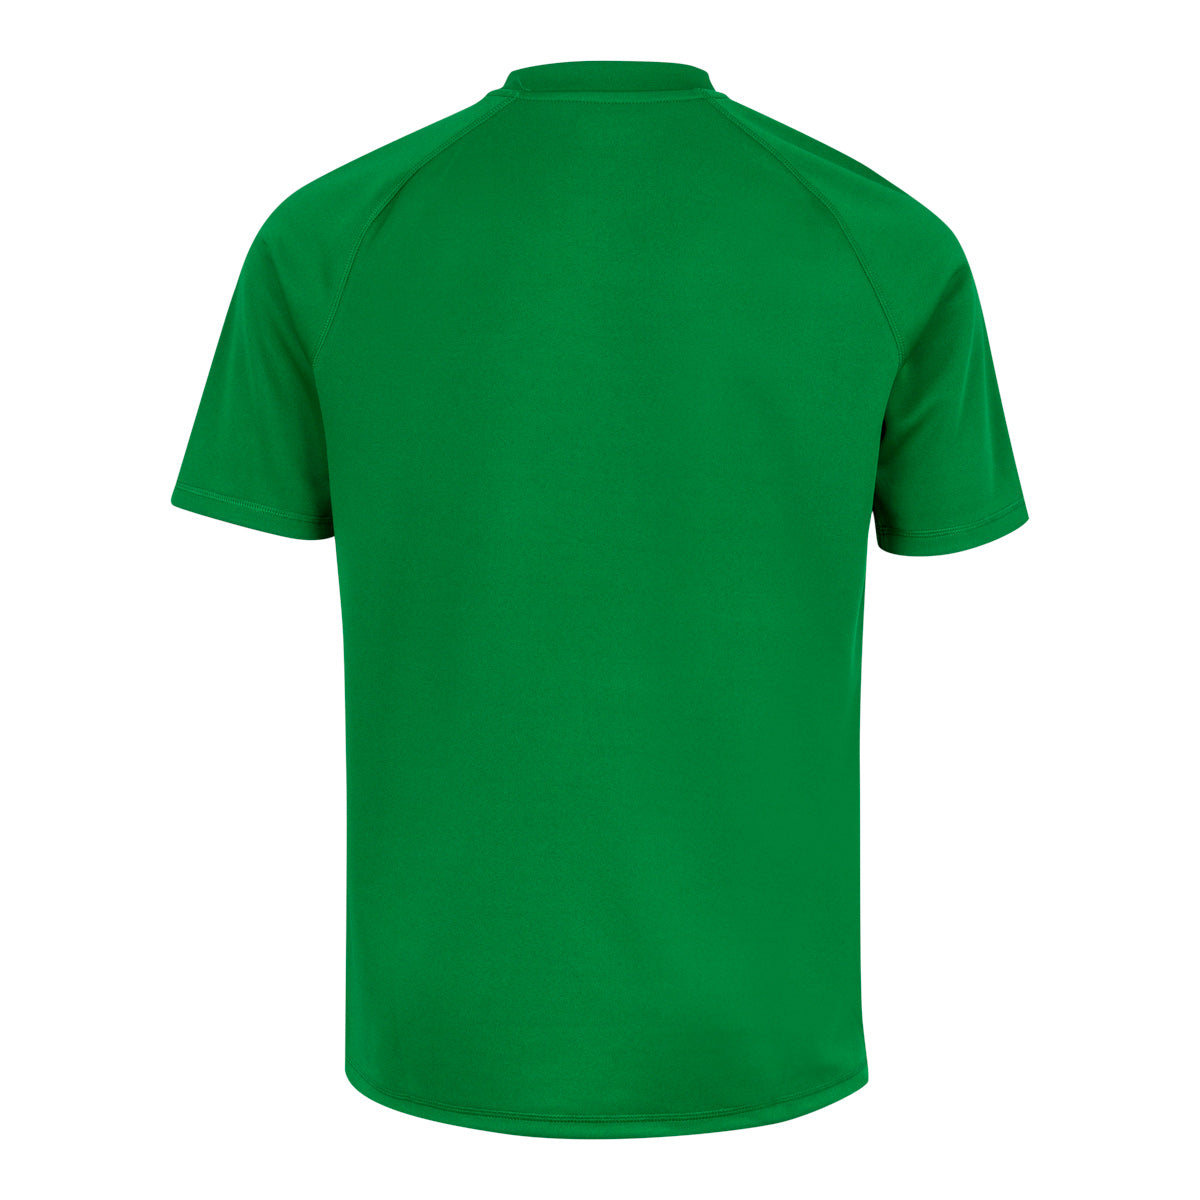 Maillot Rugby Telese Vert Enfant - Image 2